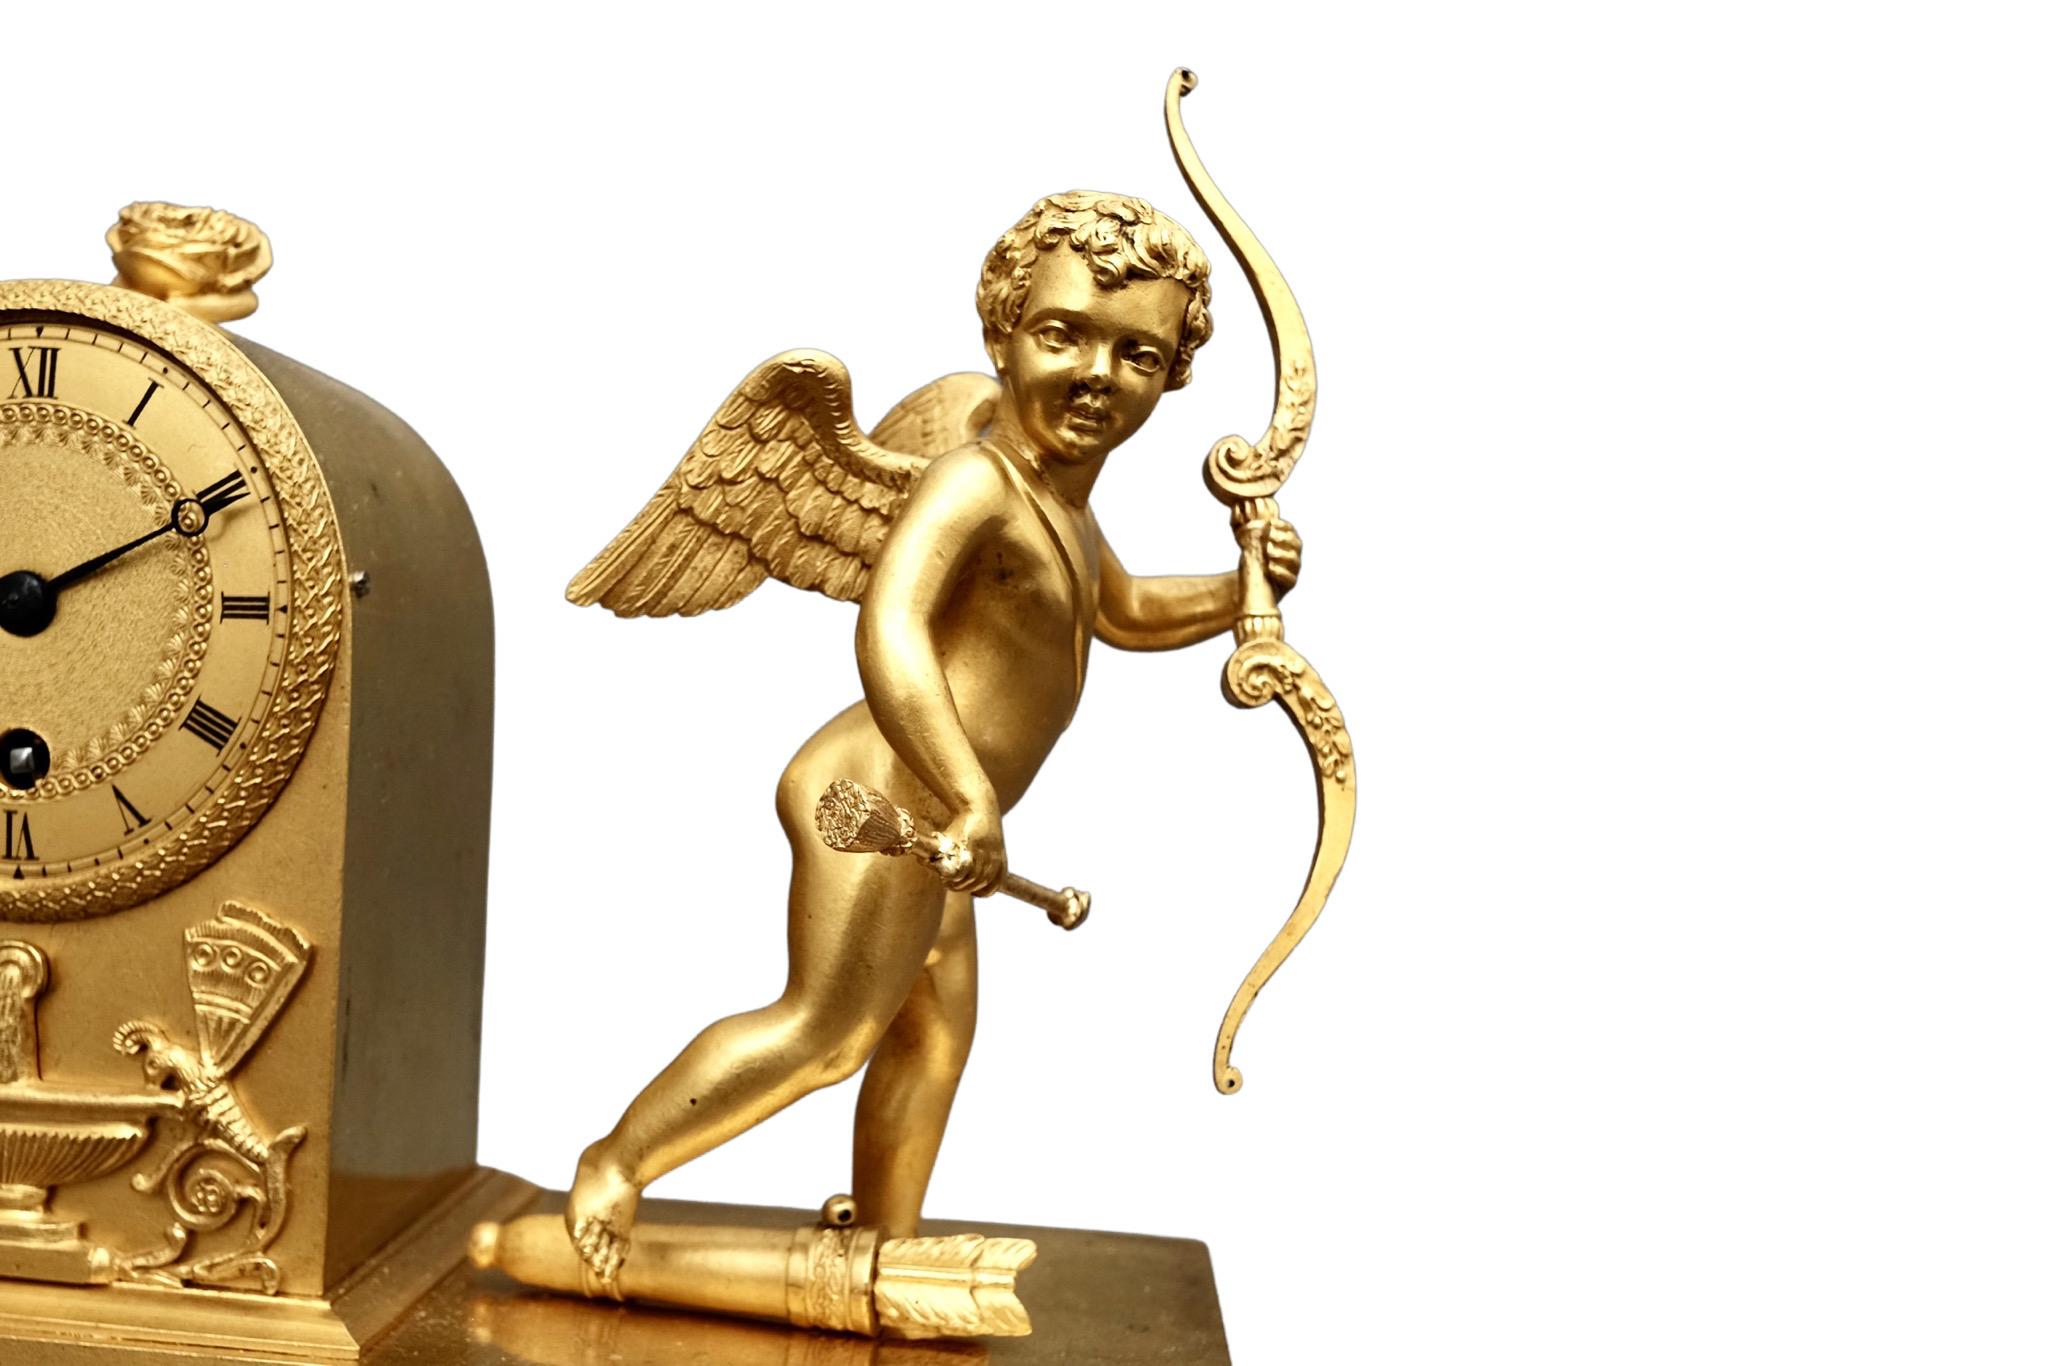 A delightful French Empire miniature ormolu timepiece mantel clock featuring a cherub with wings, bow and arrow. The cherub has one foot resting on a quiver holding more arrows and stands alongside the beautifully decorated dial with Roman numerals